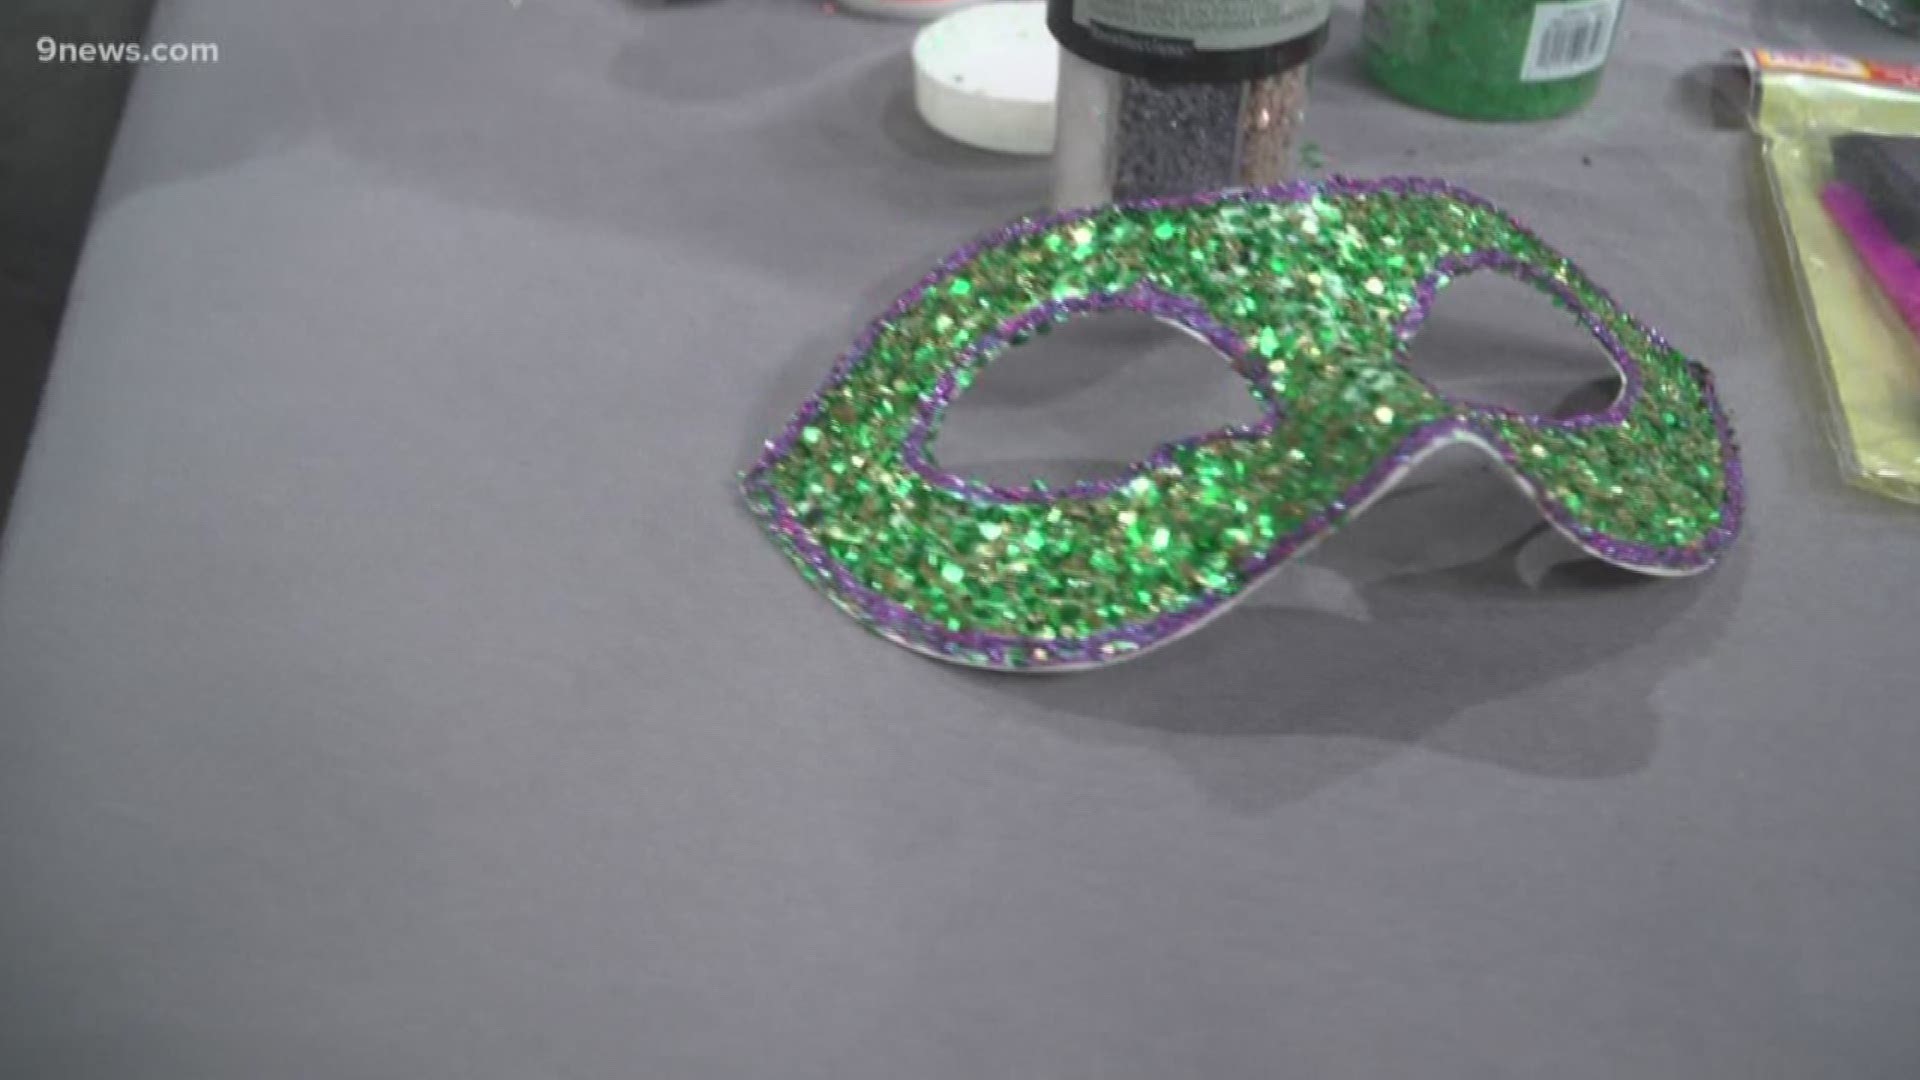 Becky Ditchfield is getting crafty! She demonstrated how to decorate your own Mardi Gras masks ahead of Fat Tuesday.